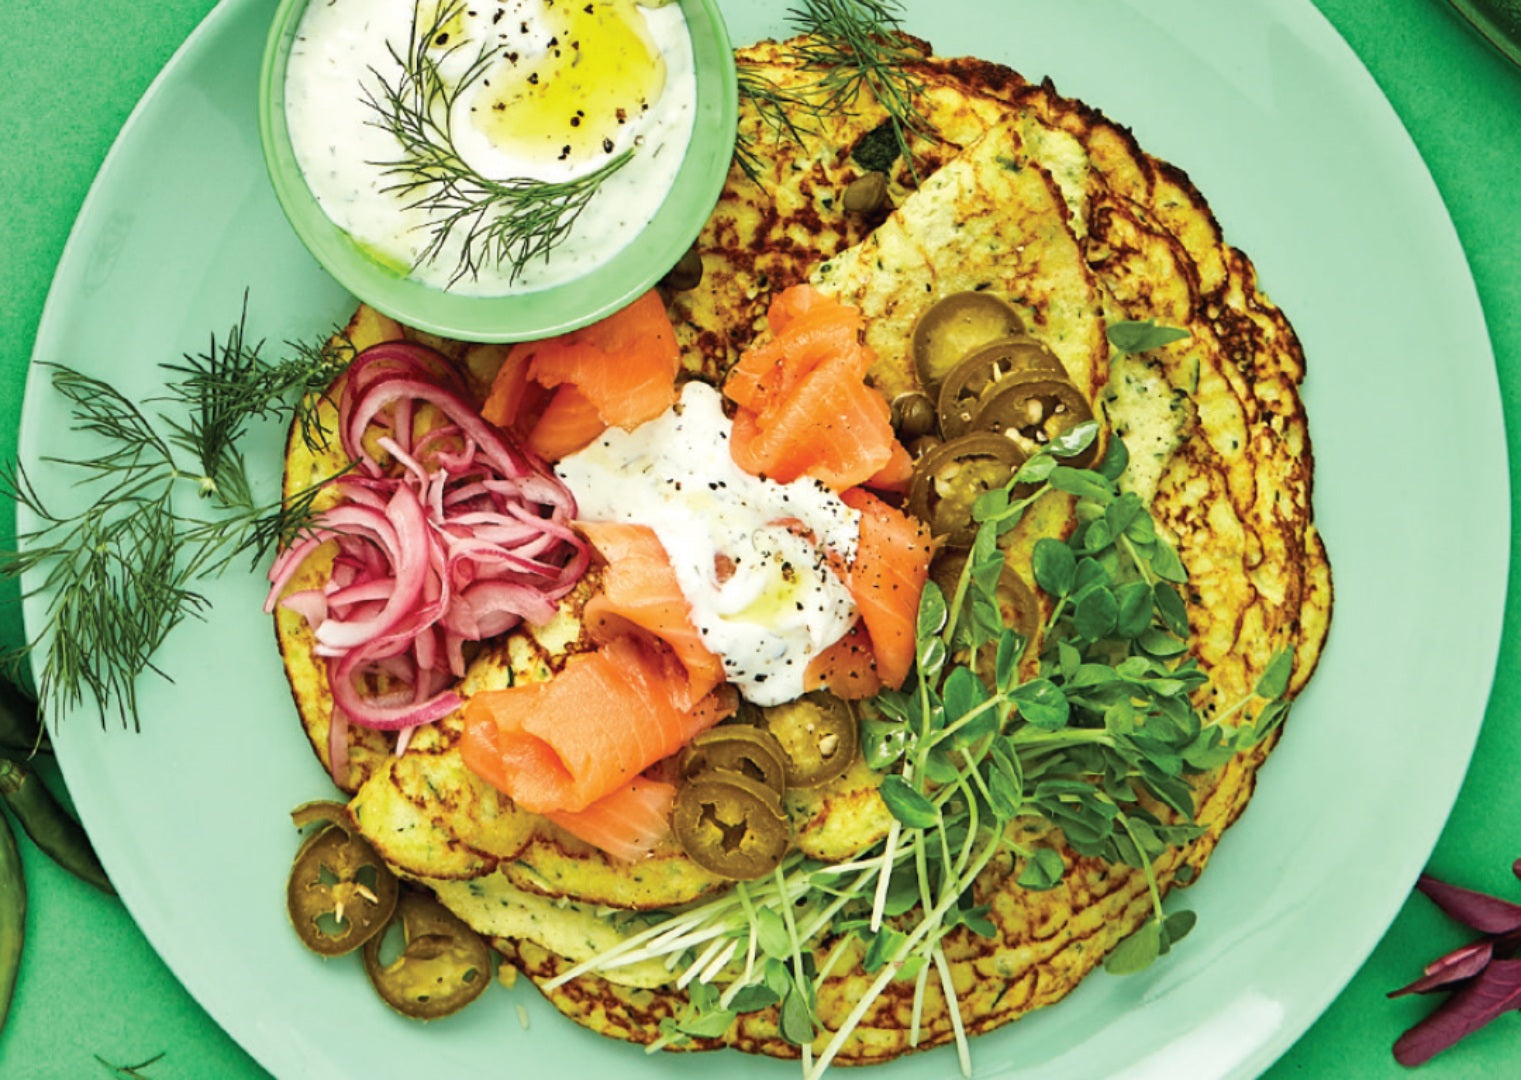 A plate of zucchini crepes topped with smoked salmon, red onion and dill